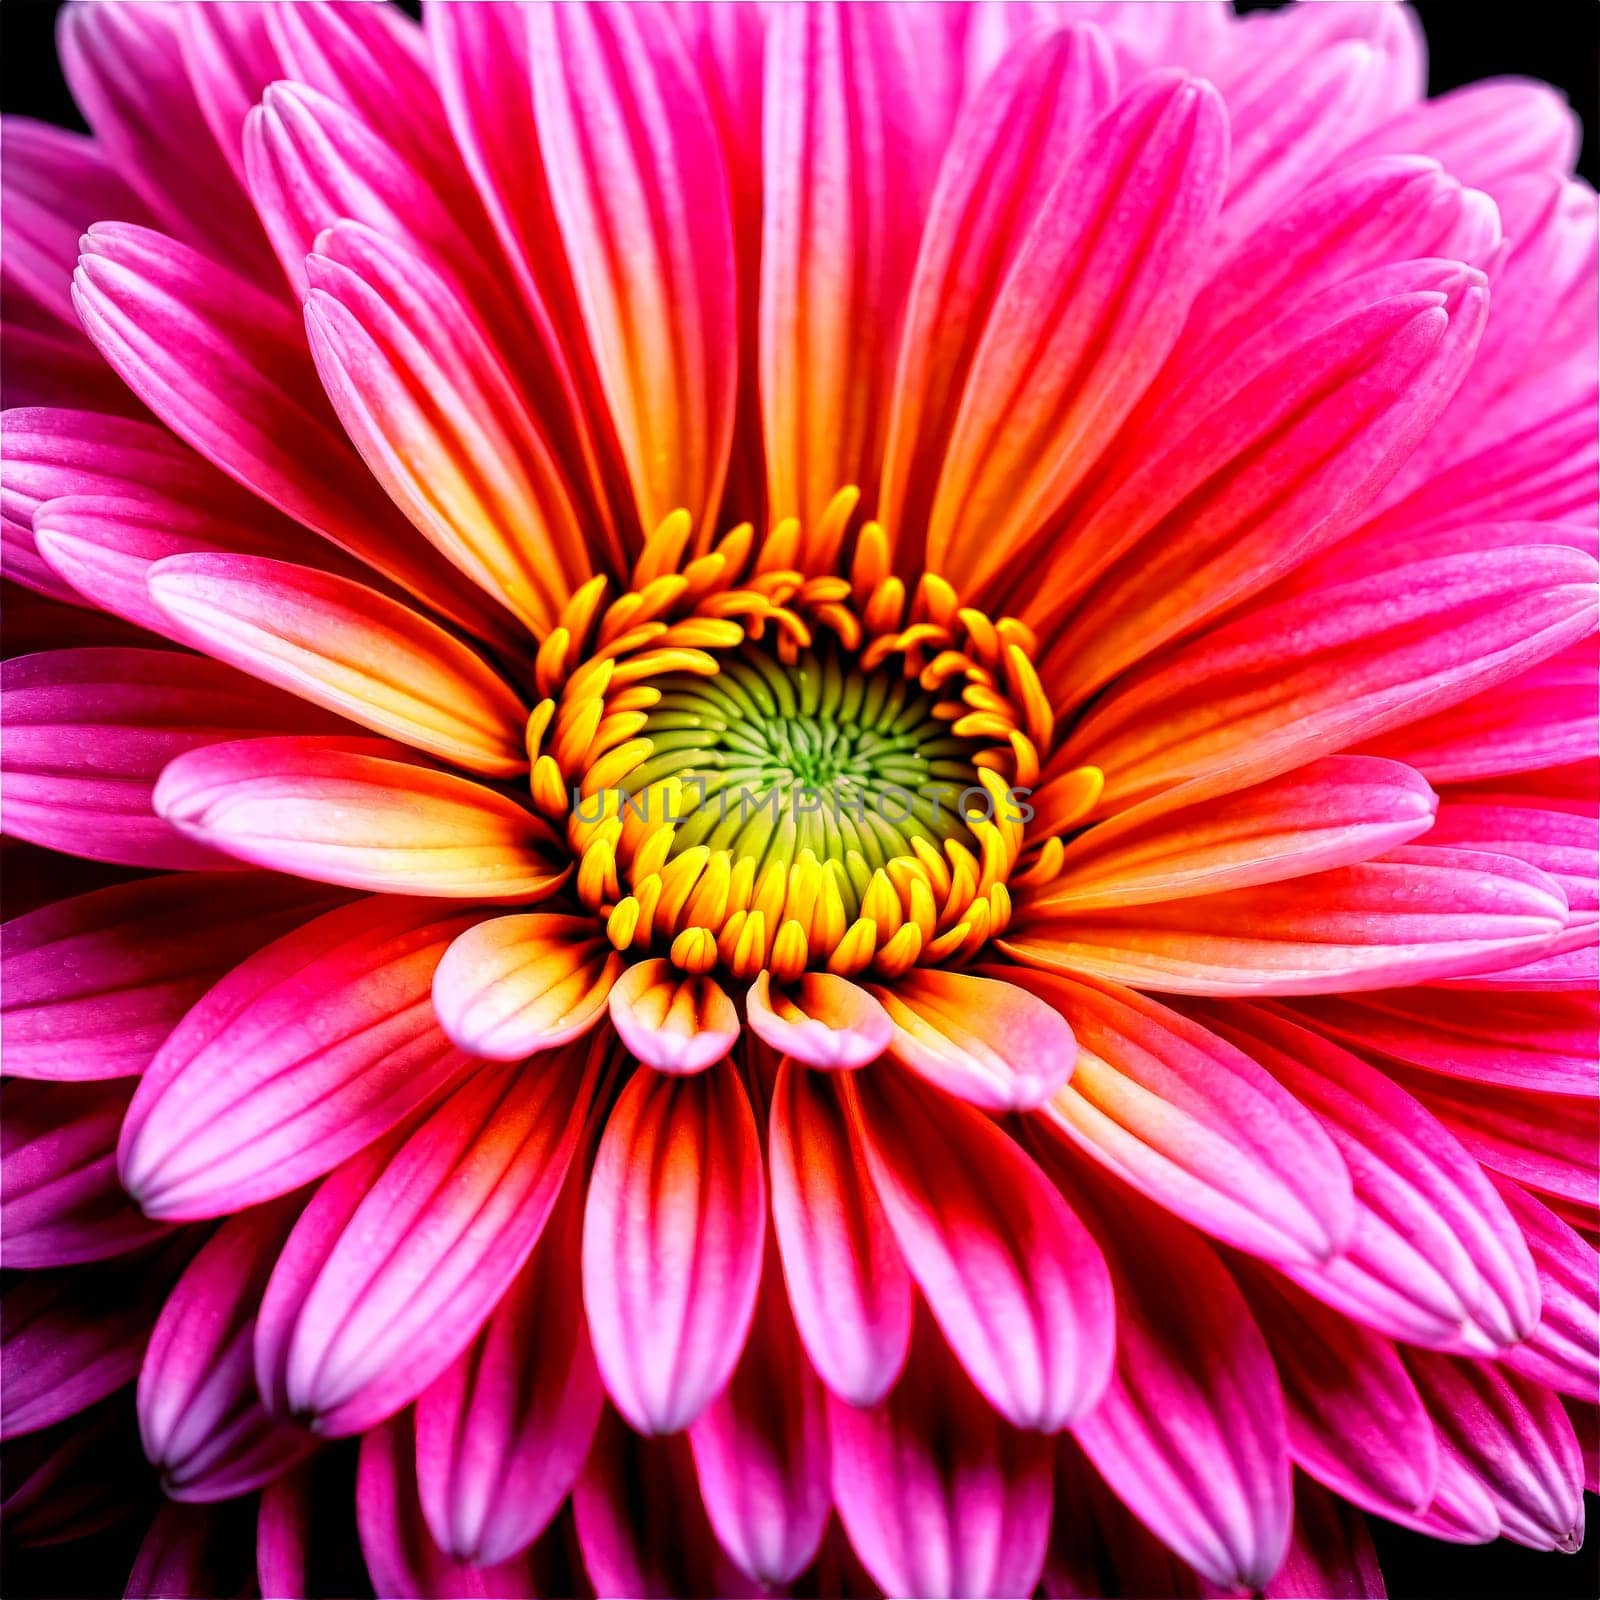 Pink chrysanthemum dense layers of curved petals ombre effect from light pink edges to darker. Flowers isolated on transparent background by Matiunina